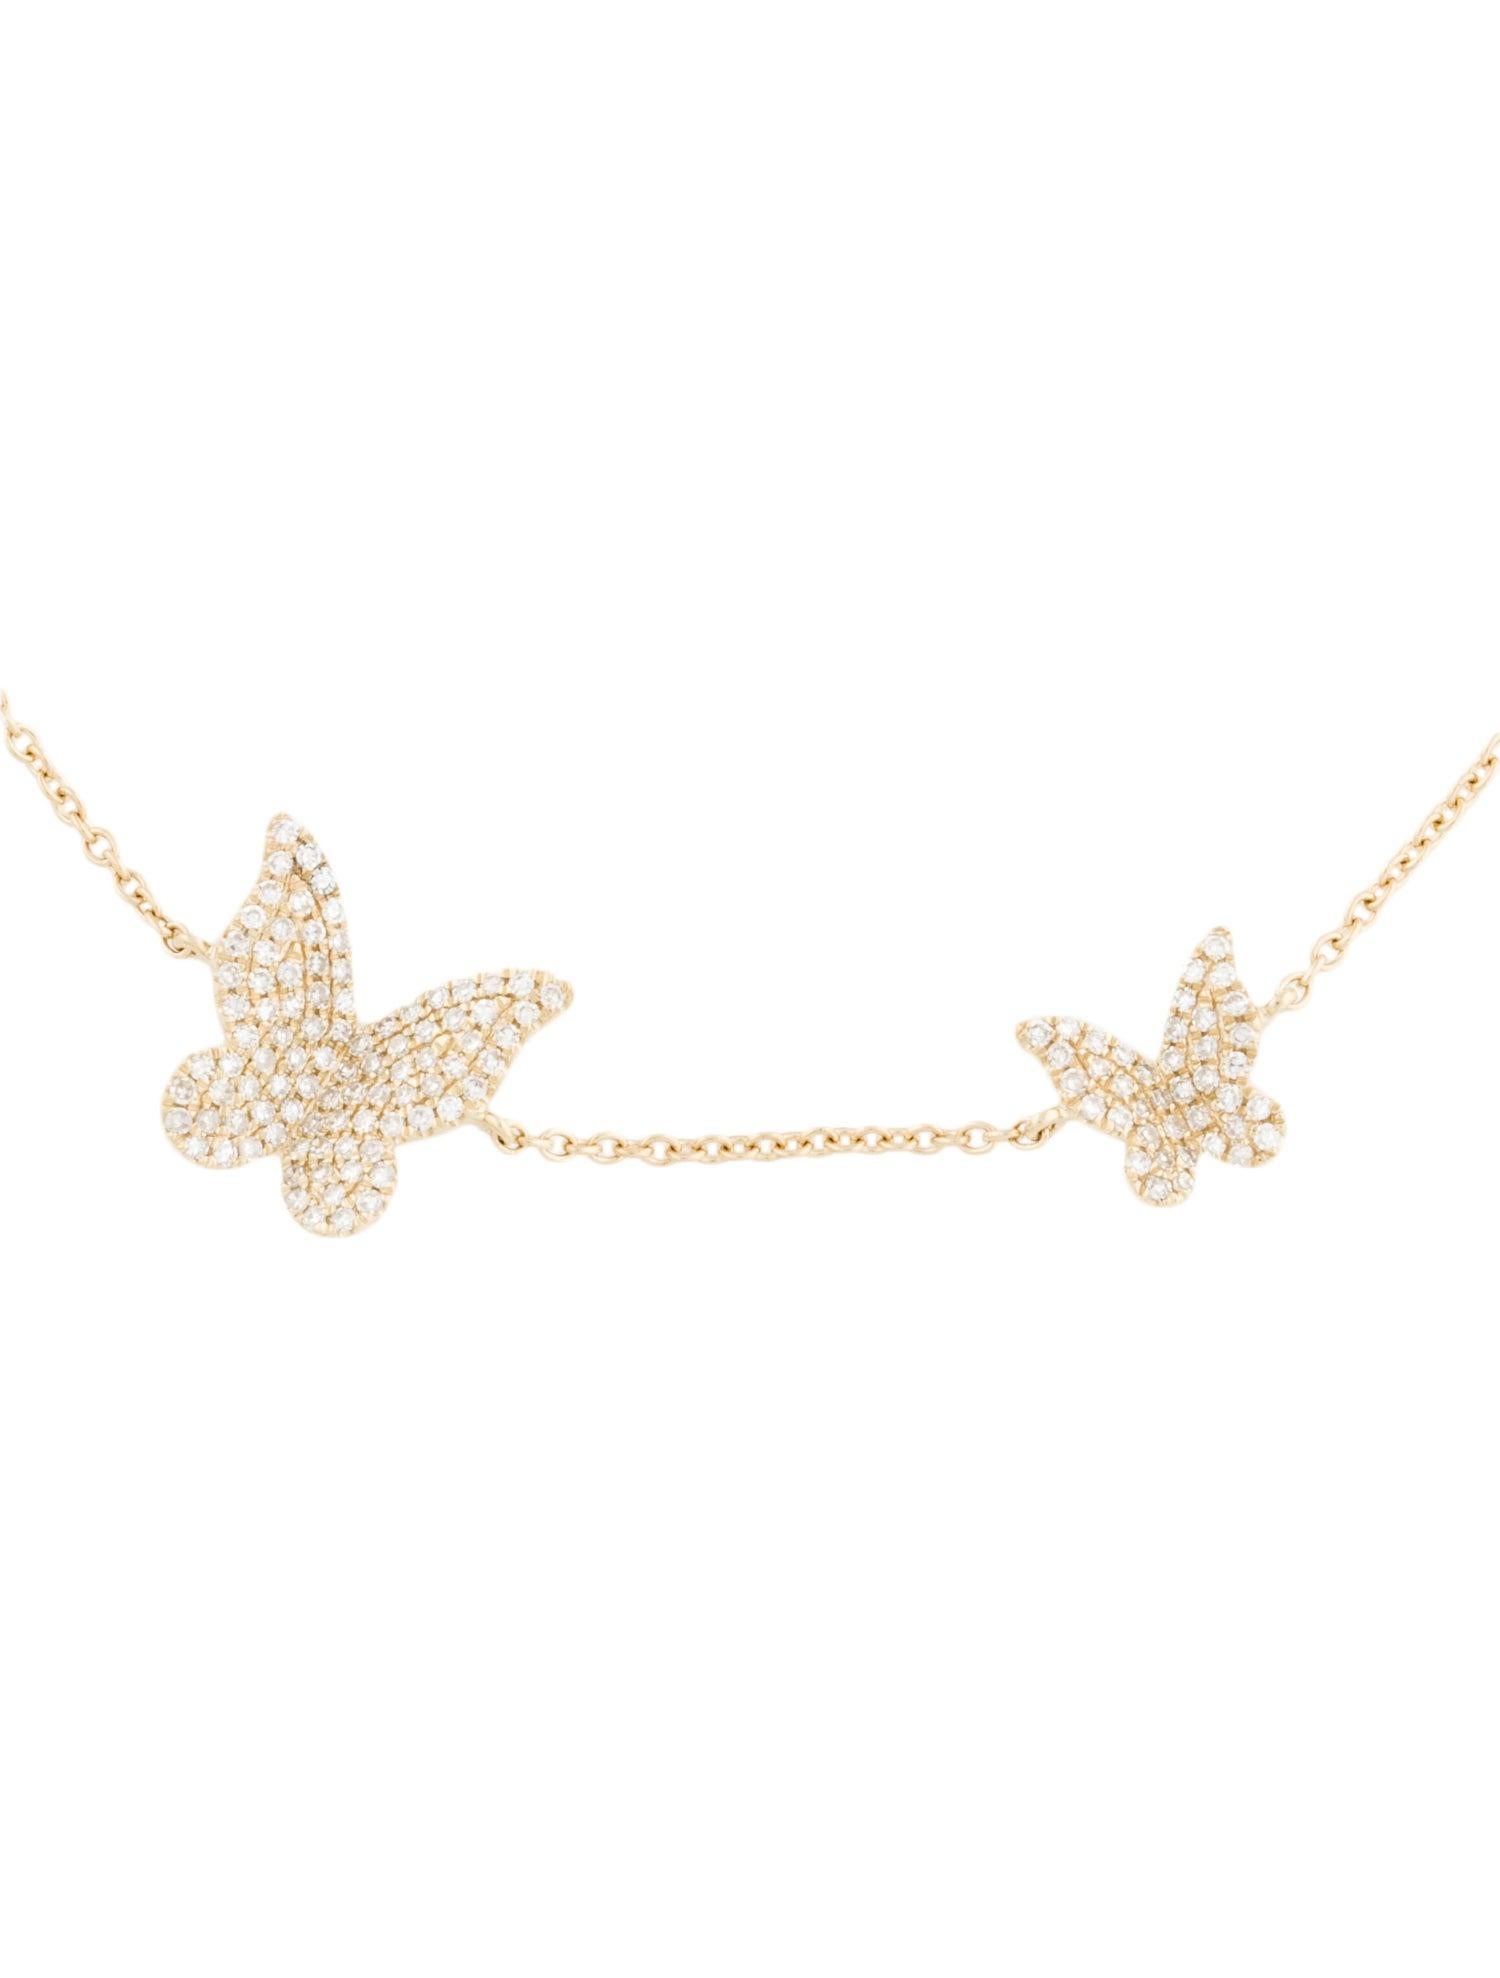 Butterfly Chain Design Bracelet: This beautiful and eye-catching Butterfly Bracelet is made of 14K Gold and features 0.35 carats of natural round white Diamonds; the bracelet length is adjustable from 6.75